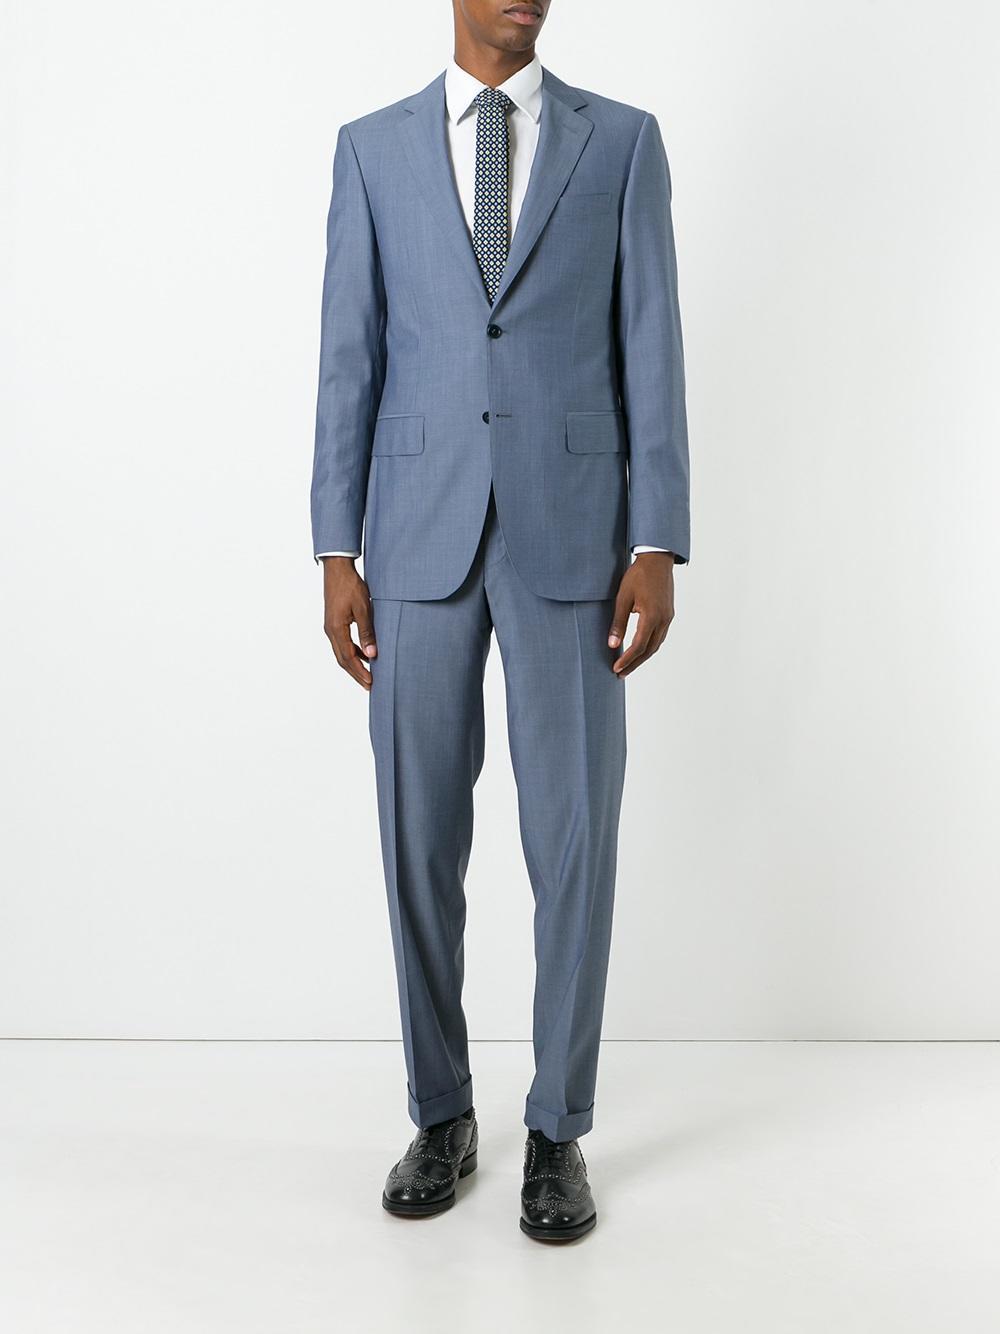 Canali Wool Two Piece Suit in Blue for Men - Lyst